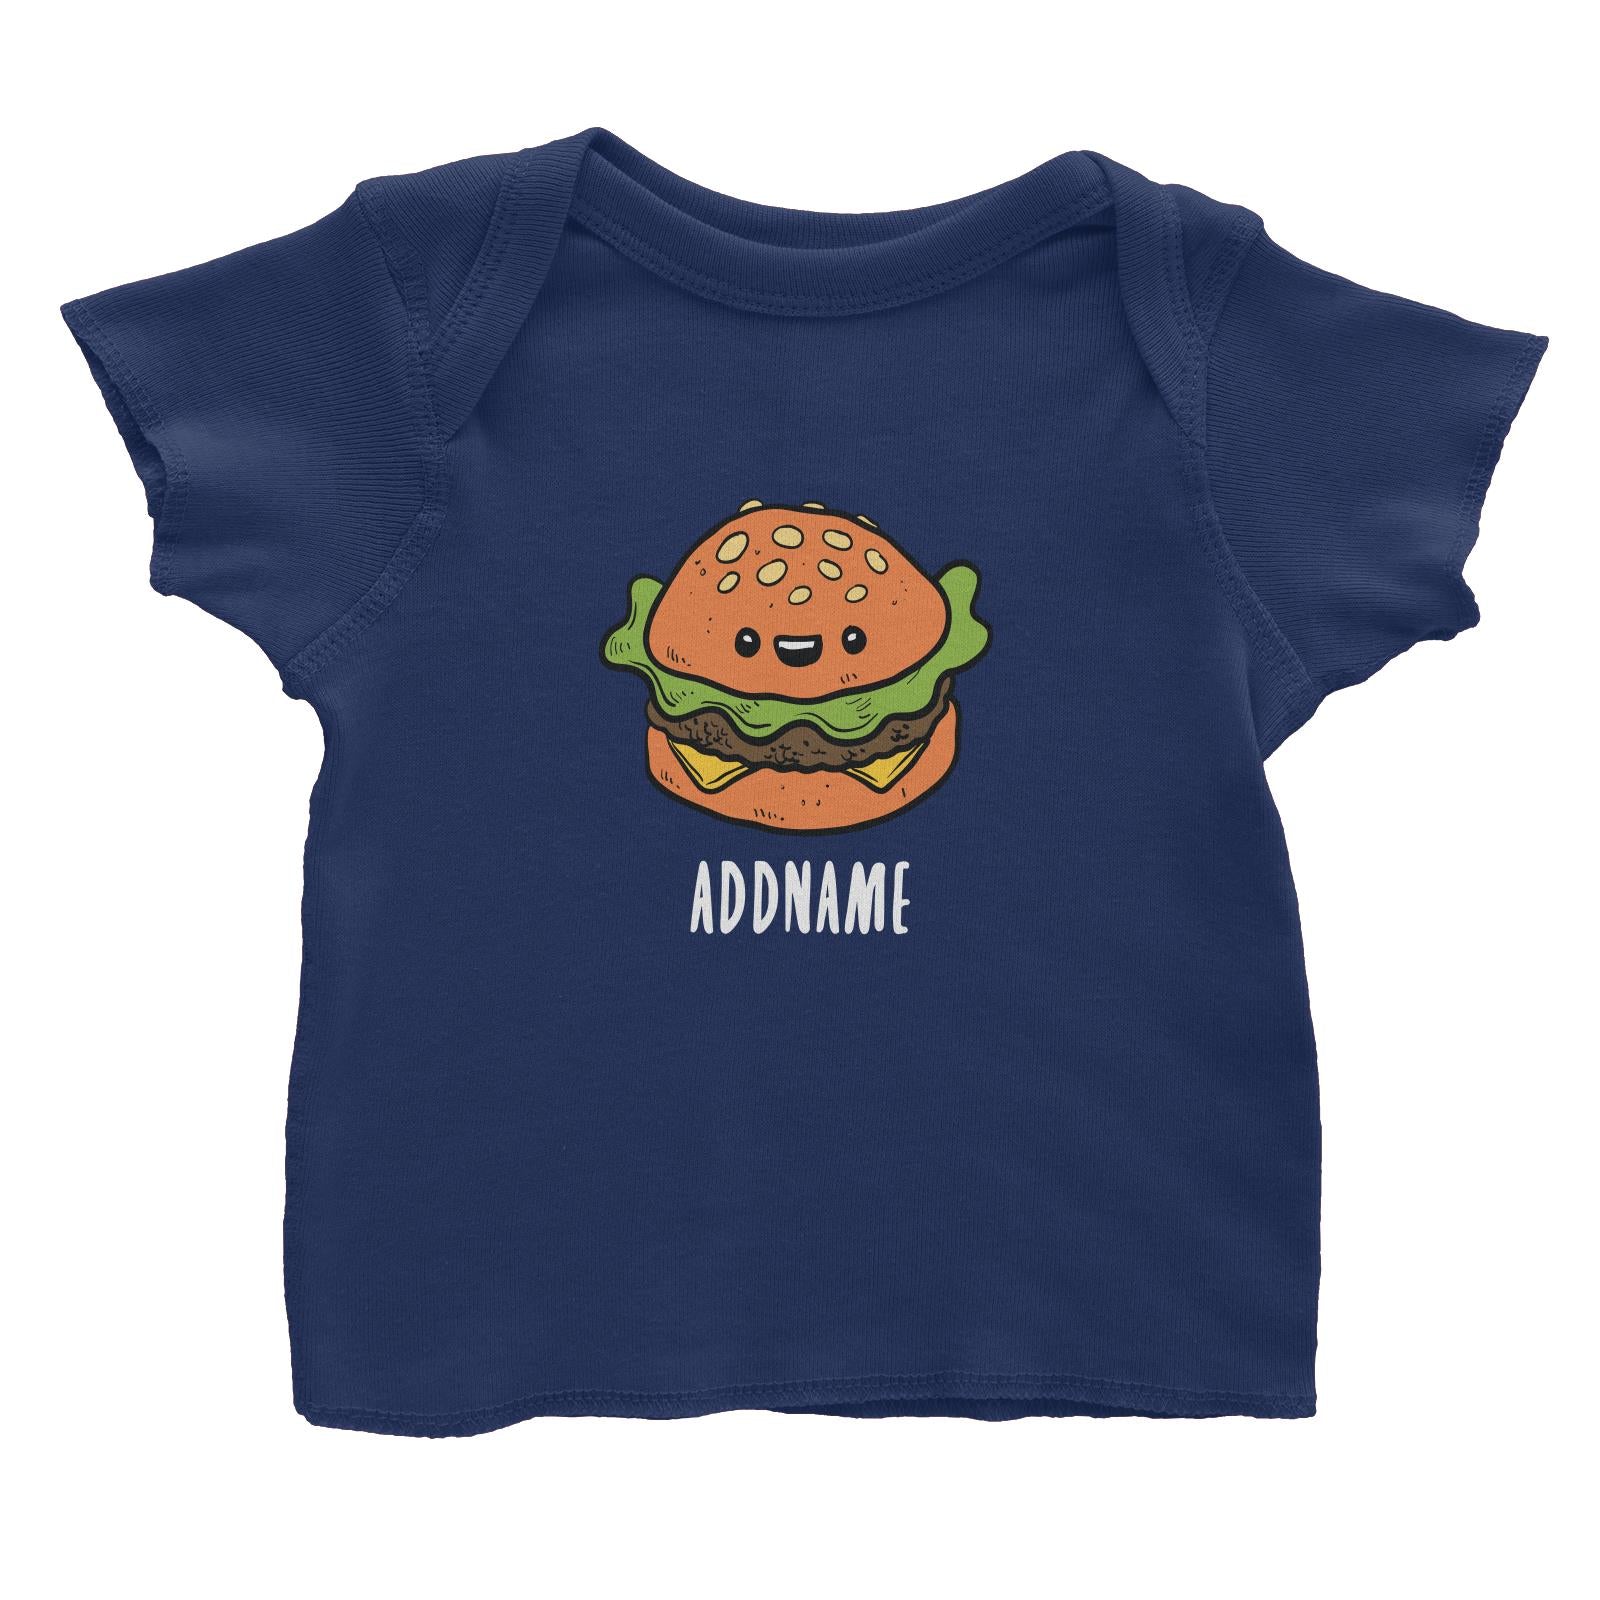 Fast Food Burger Addname Baby T-Shirt  Matching Family Comic Cartoon Personalizable Designs